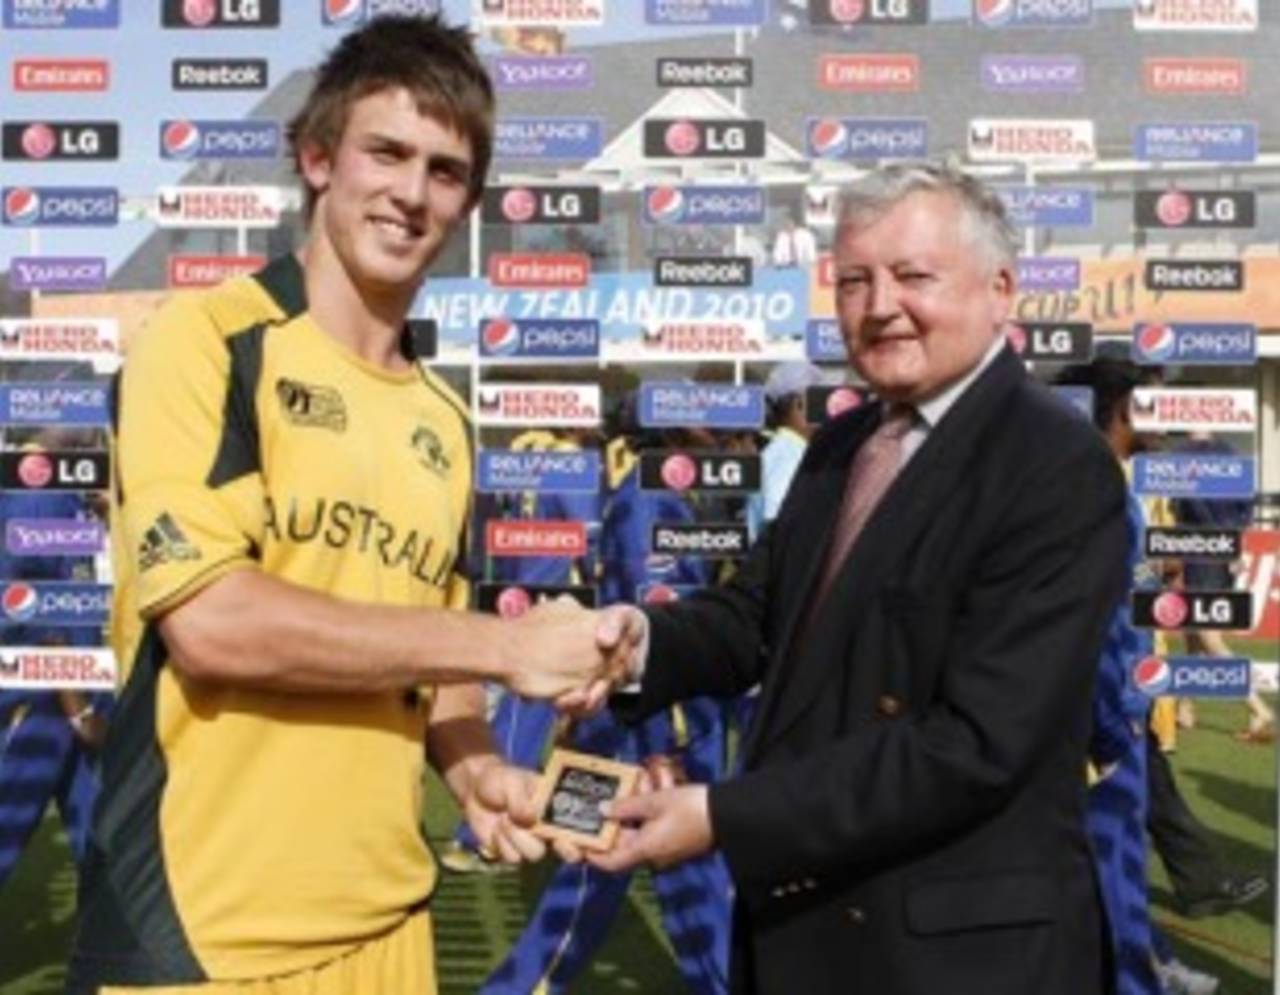 Mitchell Marsh was named Man of the Match for his 97&nbsp;&nbsp;&bull;&nbsp;&nbsp;Getty Images